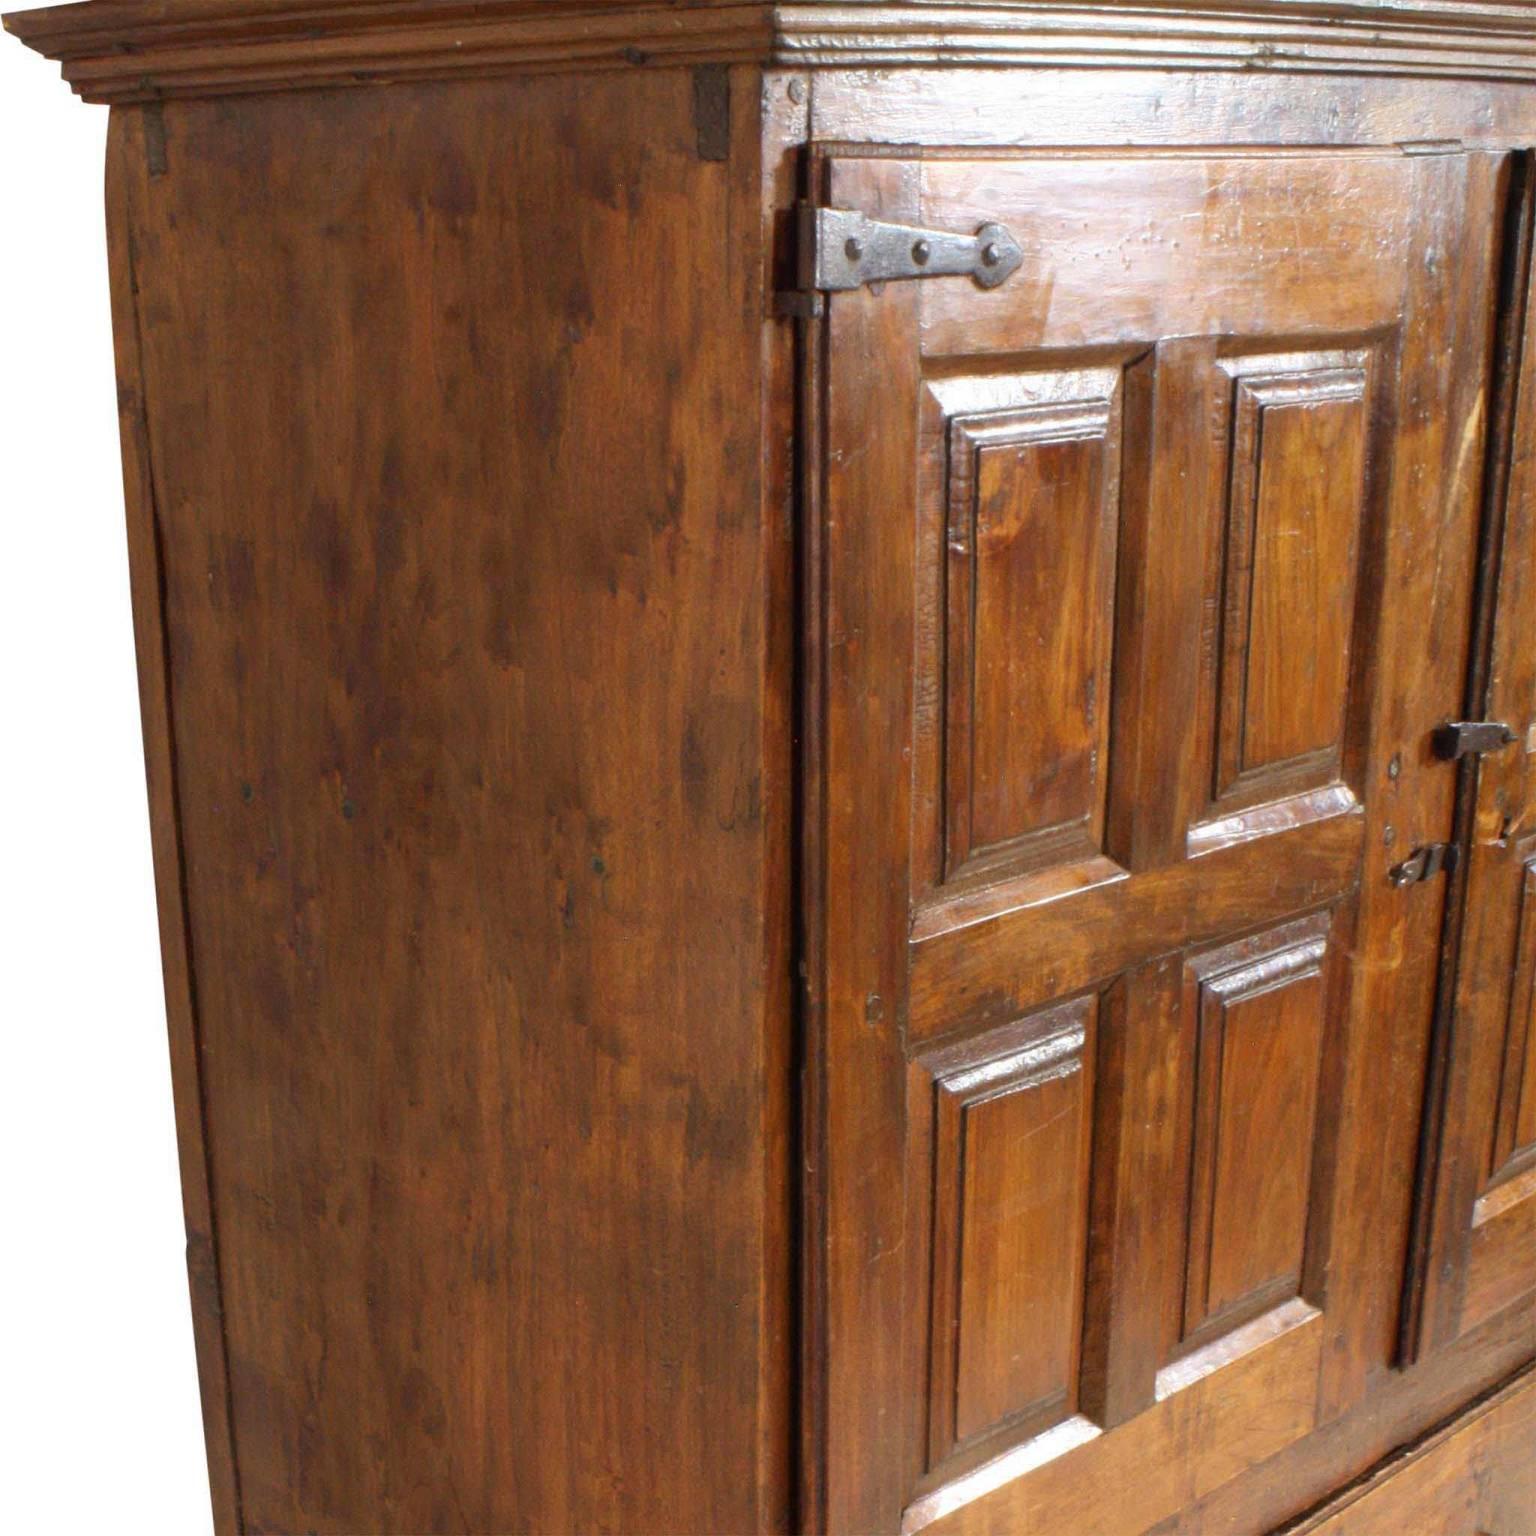 Iron Late 18th Early 19th Century Spanish Hand Hewn Hickory Cabinet